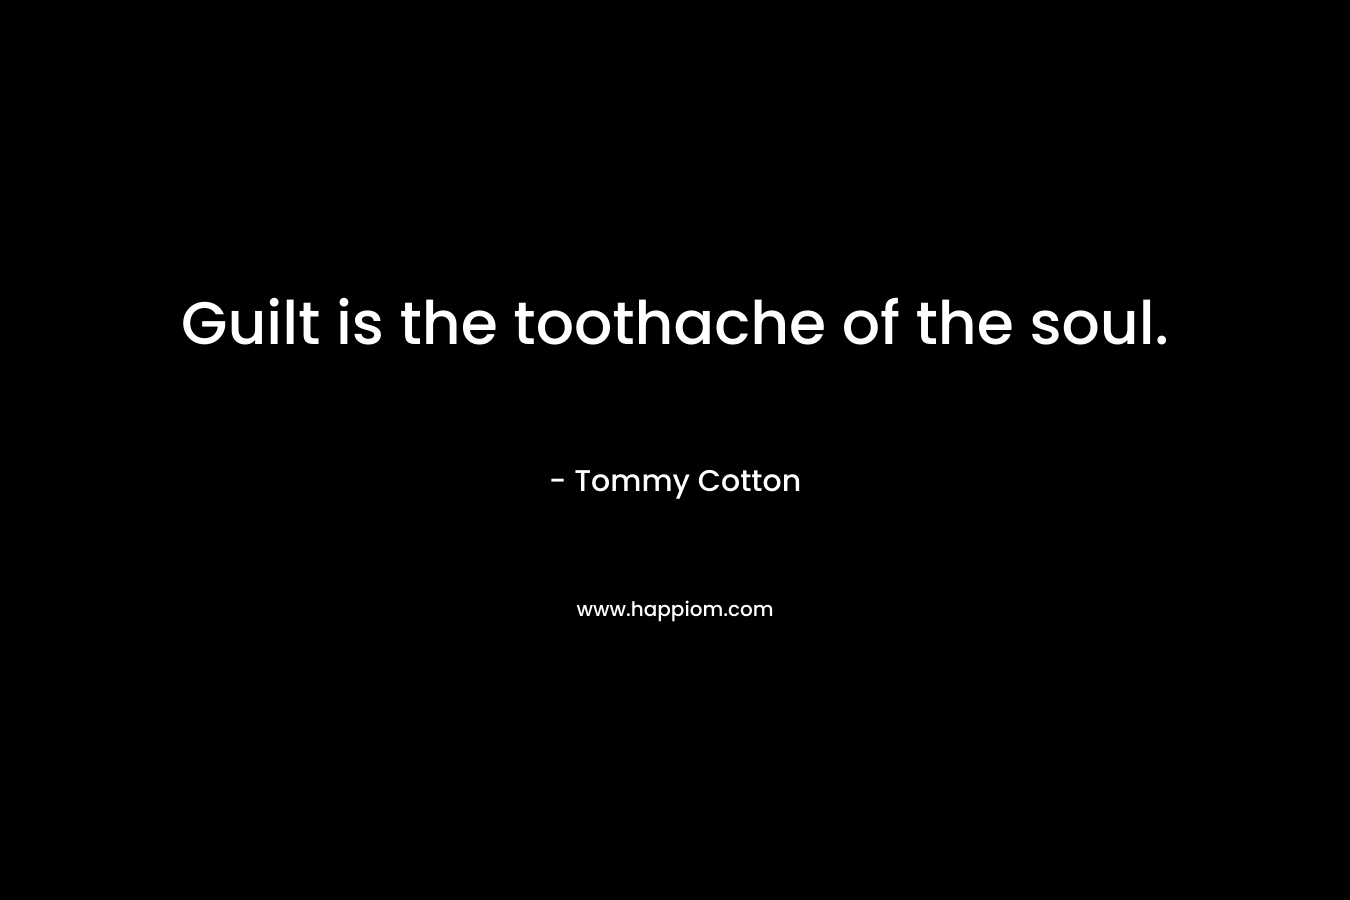 Guilt is the toothache of the soul.